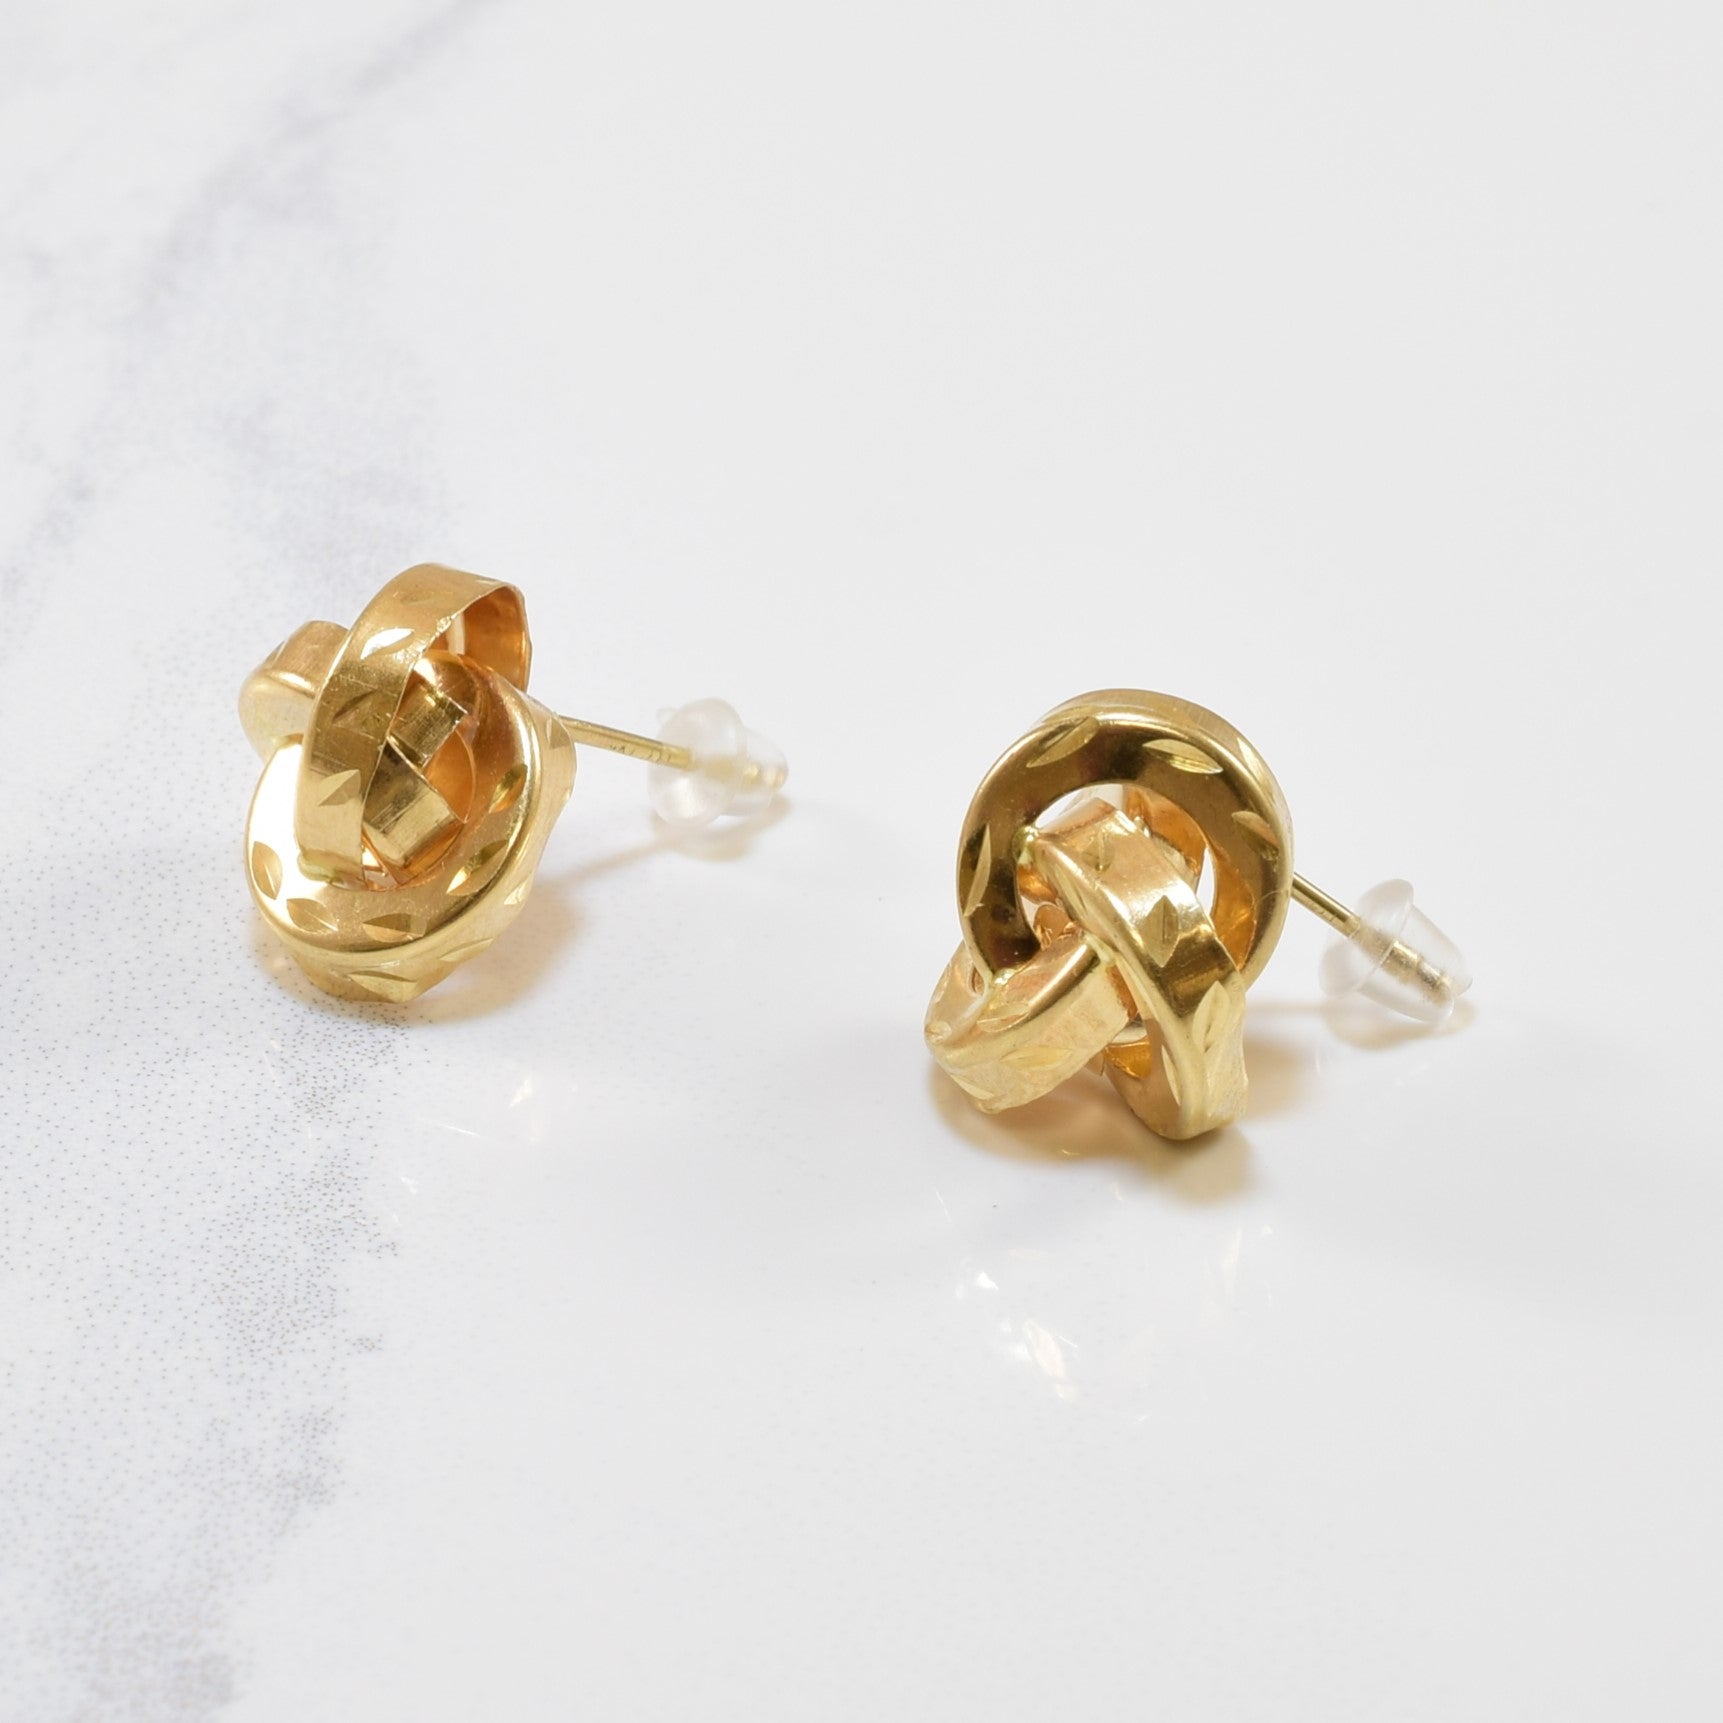 Yellow Gold Hollow Knot Stud Earrings |